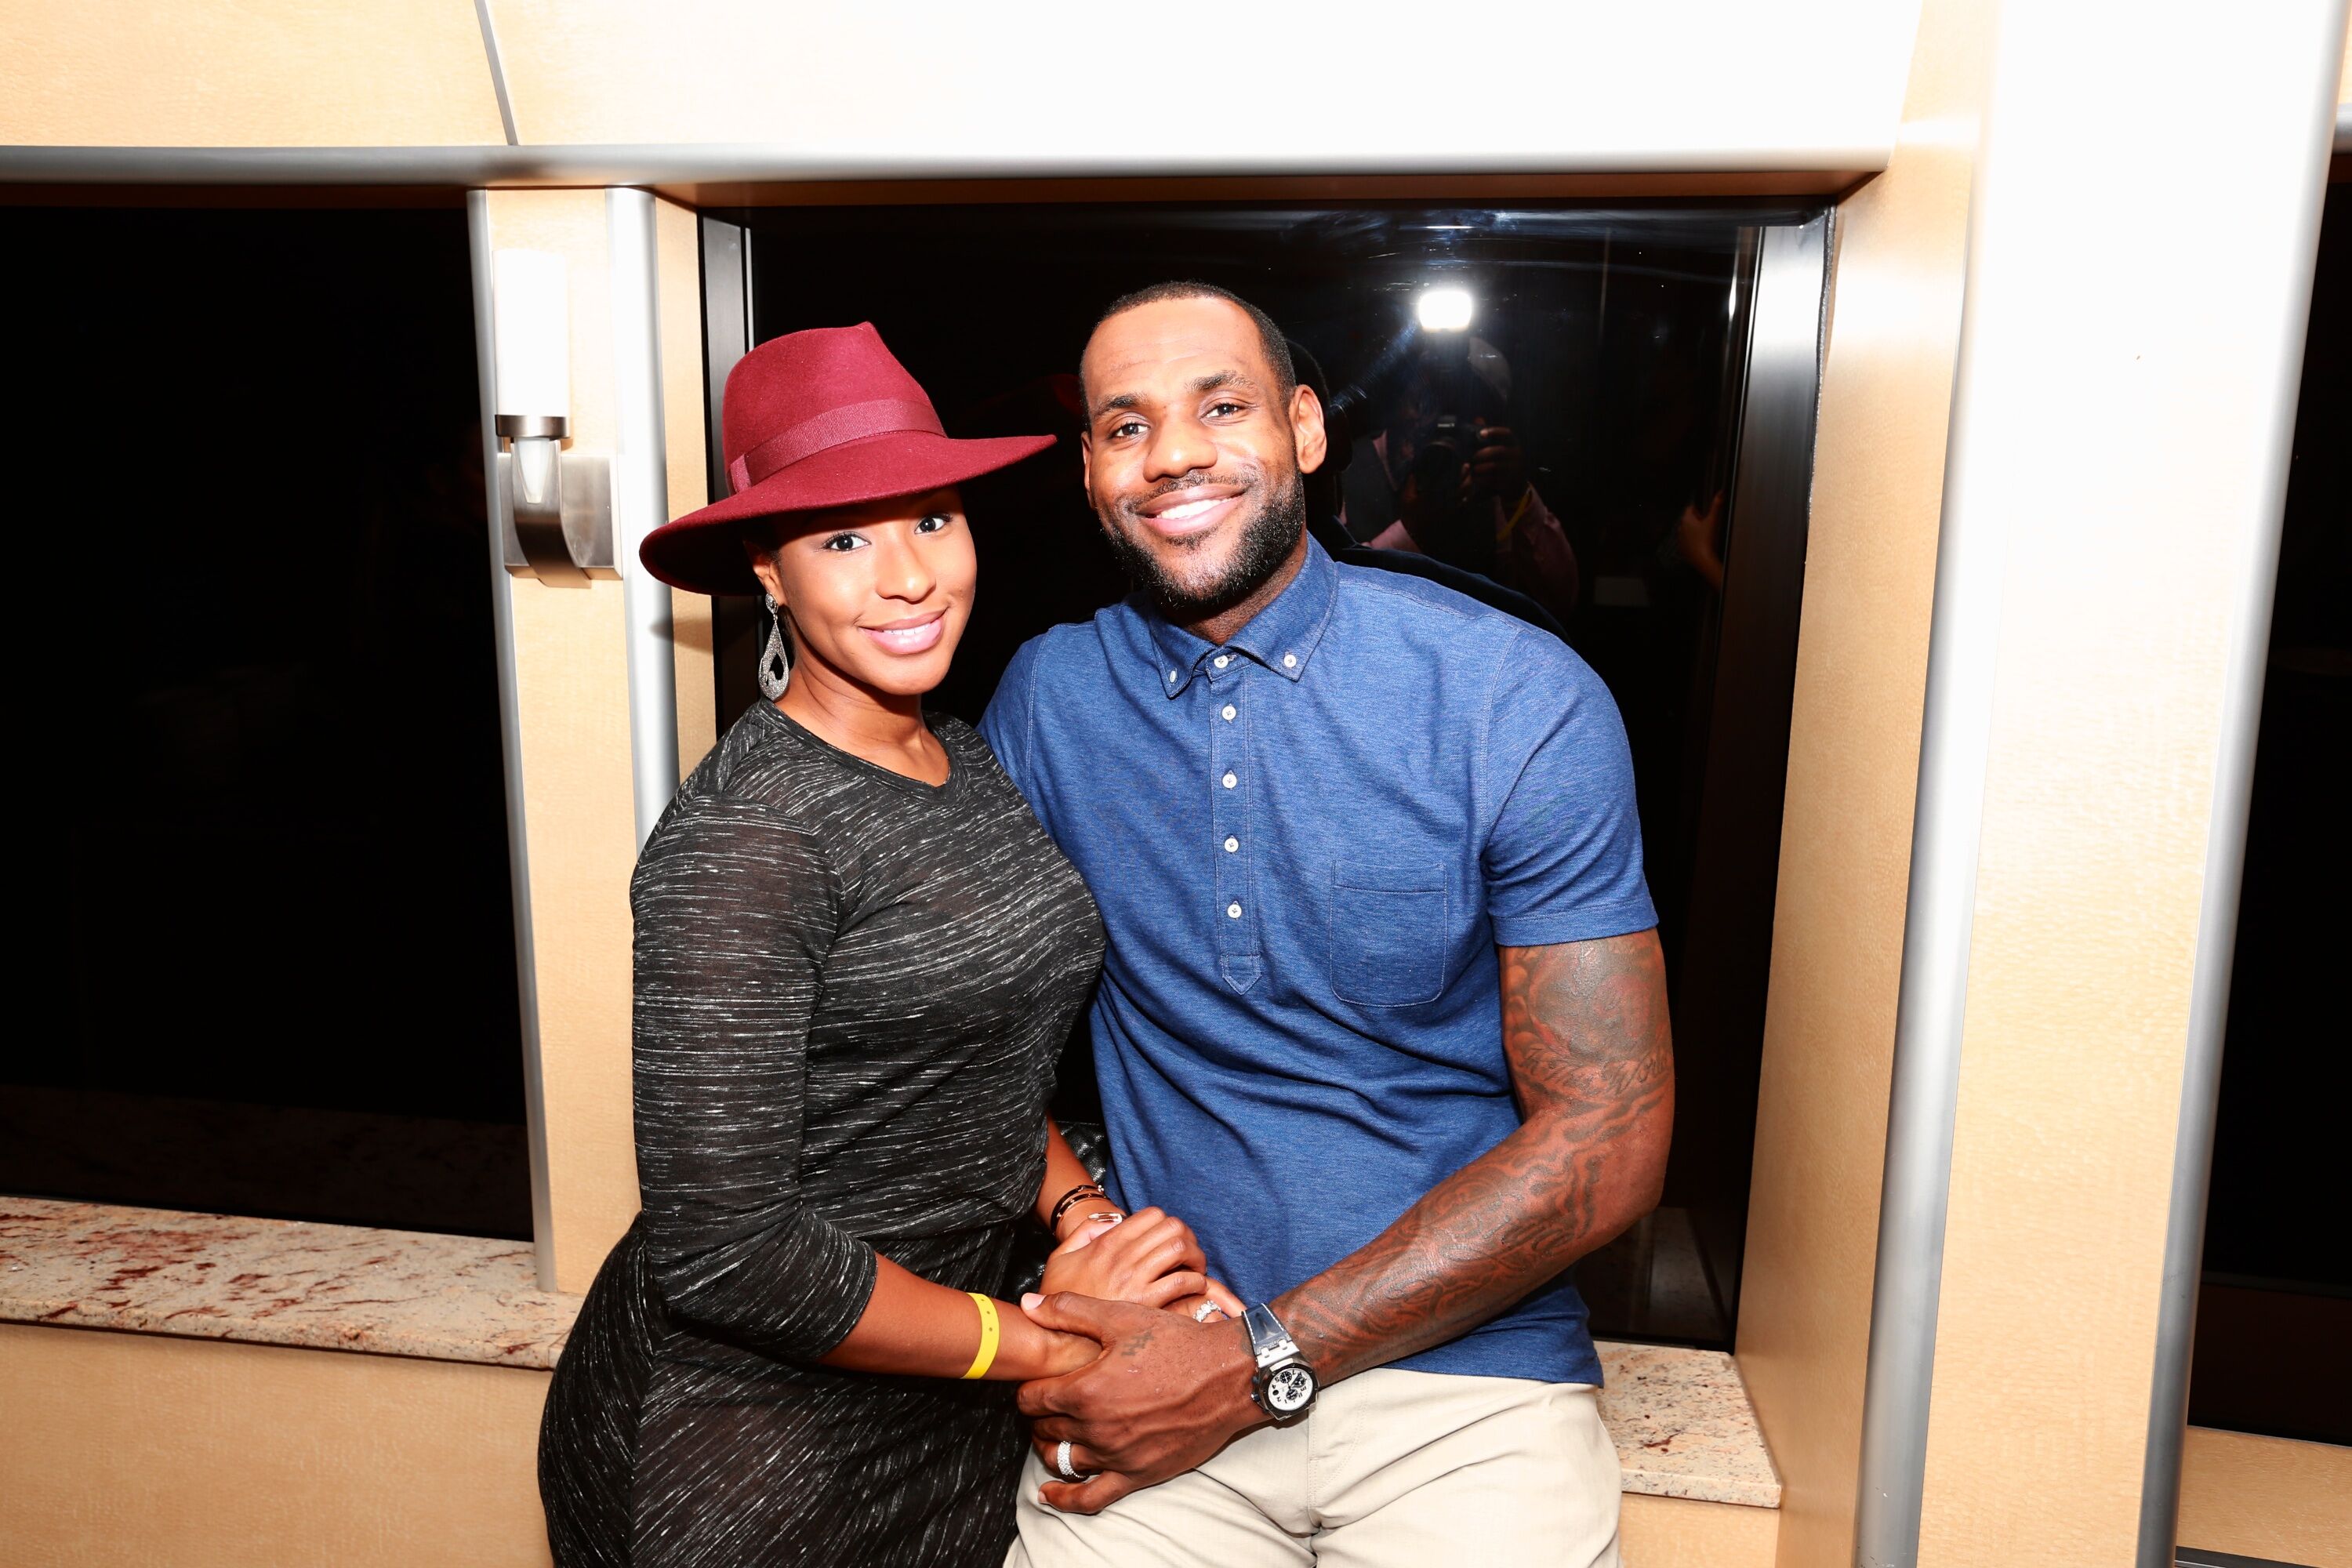 Savannah James and LeBron James attends Dwyane Wade's "Rock The Boat" 32nd Birthday Party on January 11, 2014 in Miami Beach, Florida. | Source: Getty Images